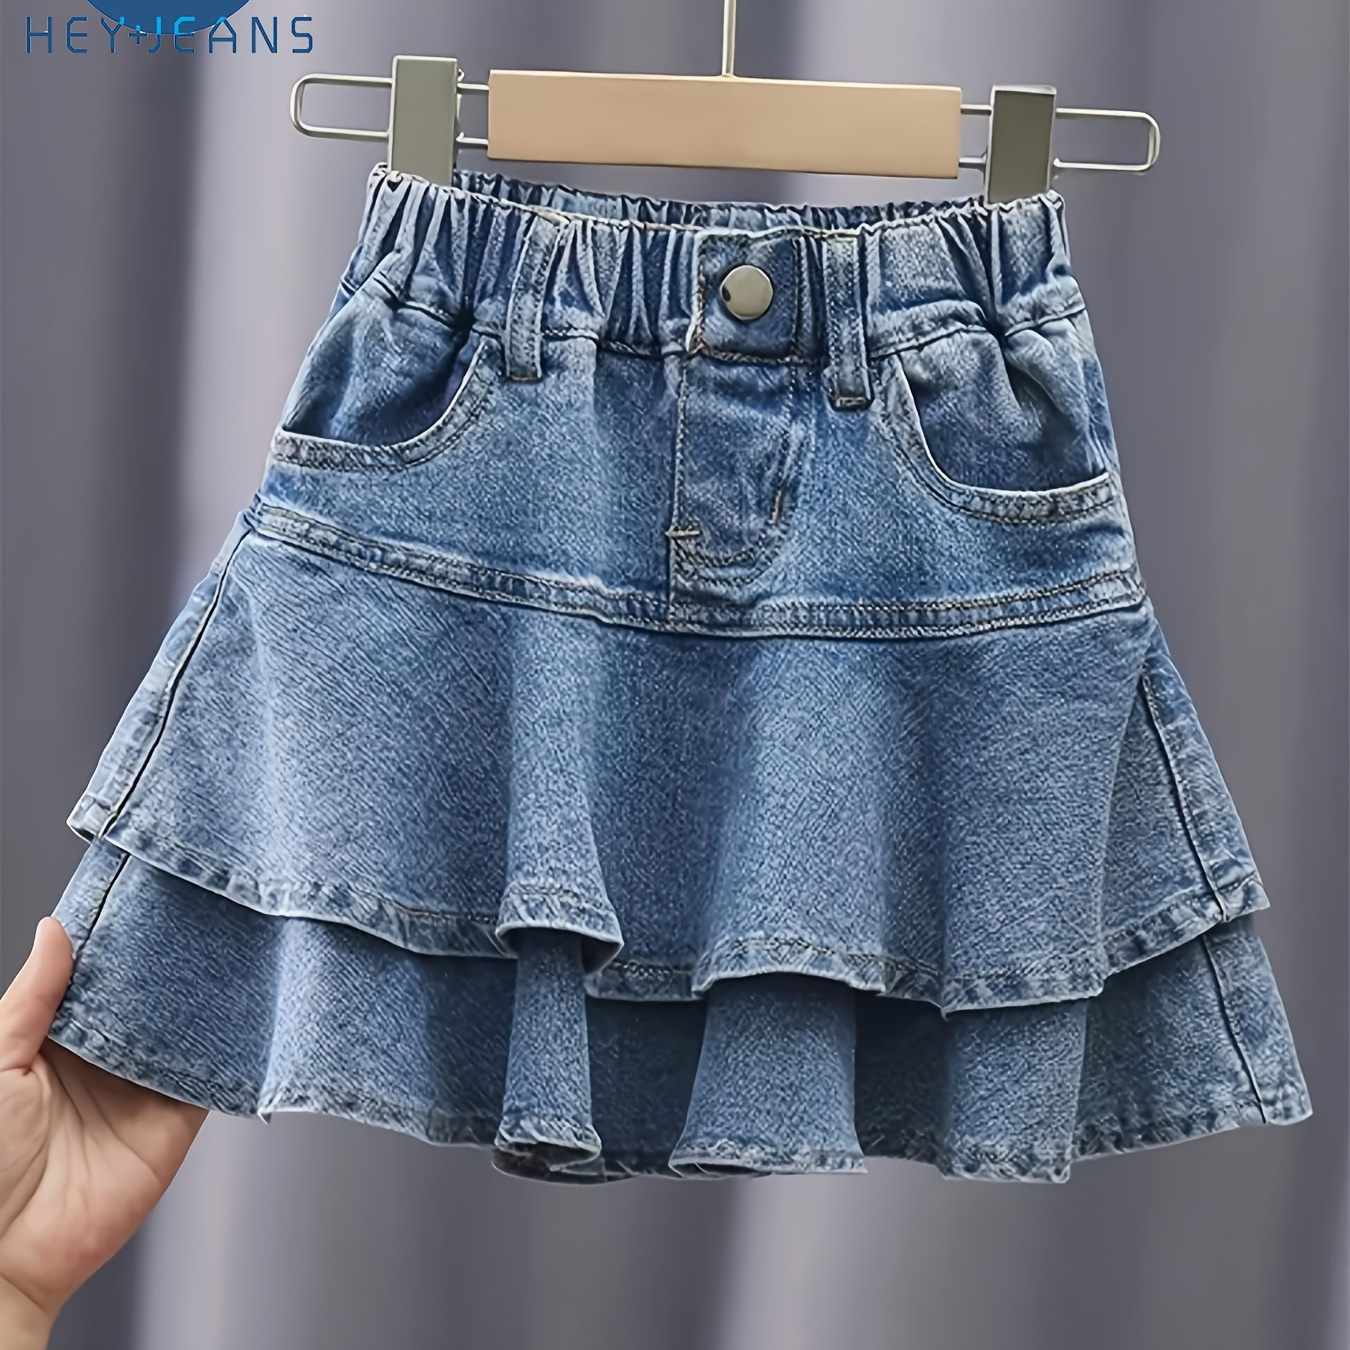 

Girls' Cotton Denim Ruffle Skirt, Summer 2024 New Arrival, Cute Style, Elastic Waistband With Button Detail, Tiered Design, Youth Fashion, Casual Wear